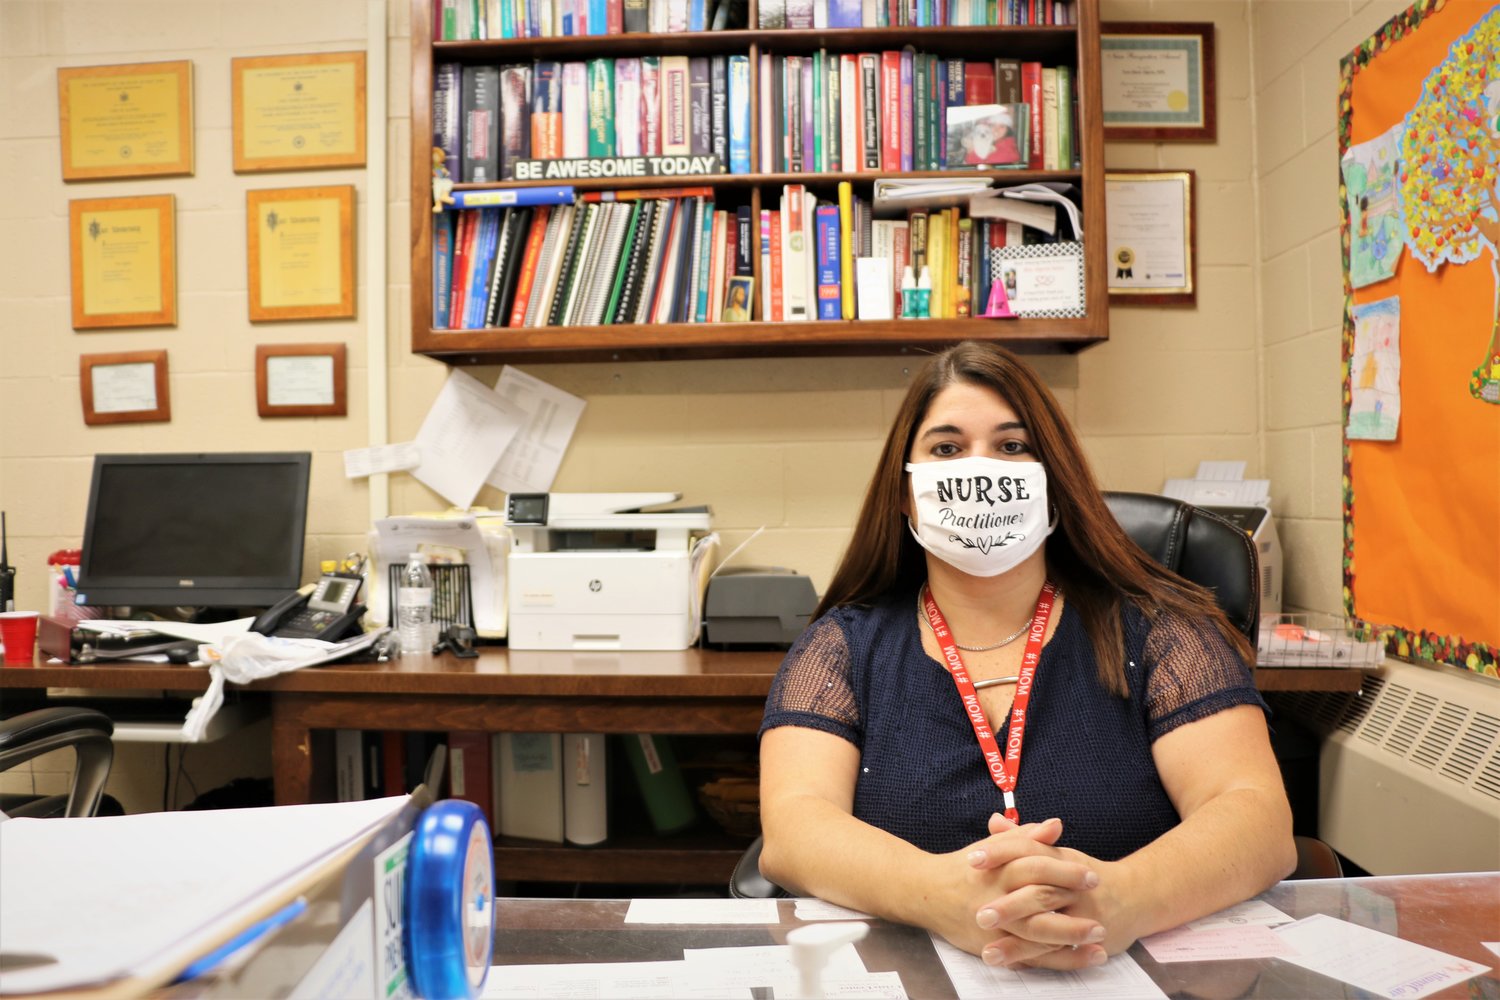 Algerio-Vento stressed the importance of mask wearing, social distancing and health checks for students and staff.